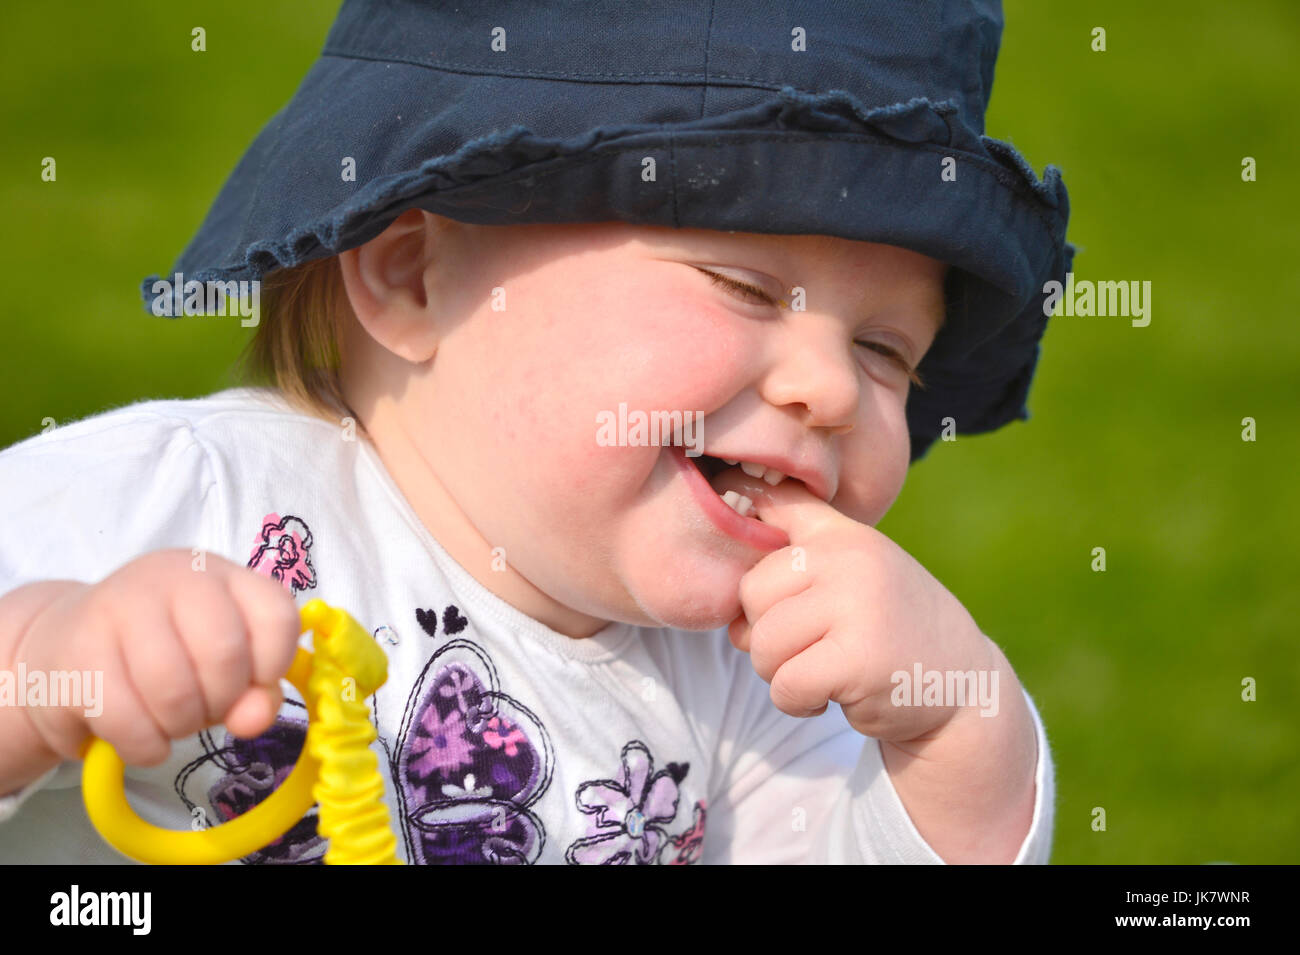 baby girl with finger in mouth wearing blue hat holding rattle Stock Photo